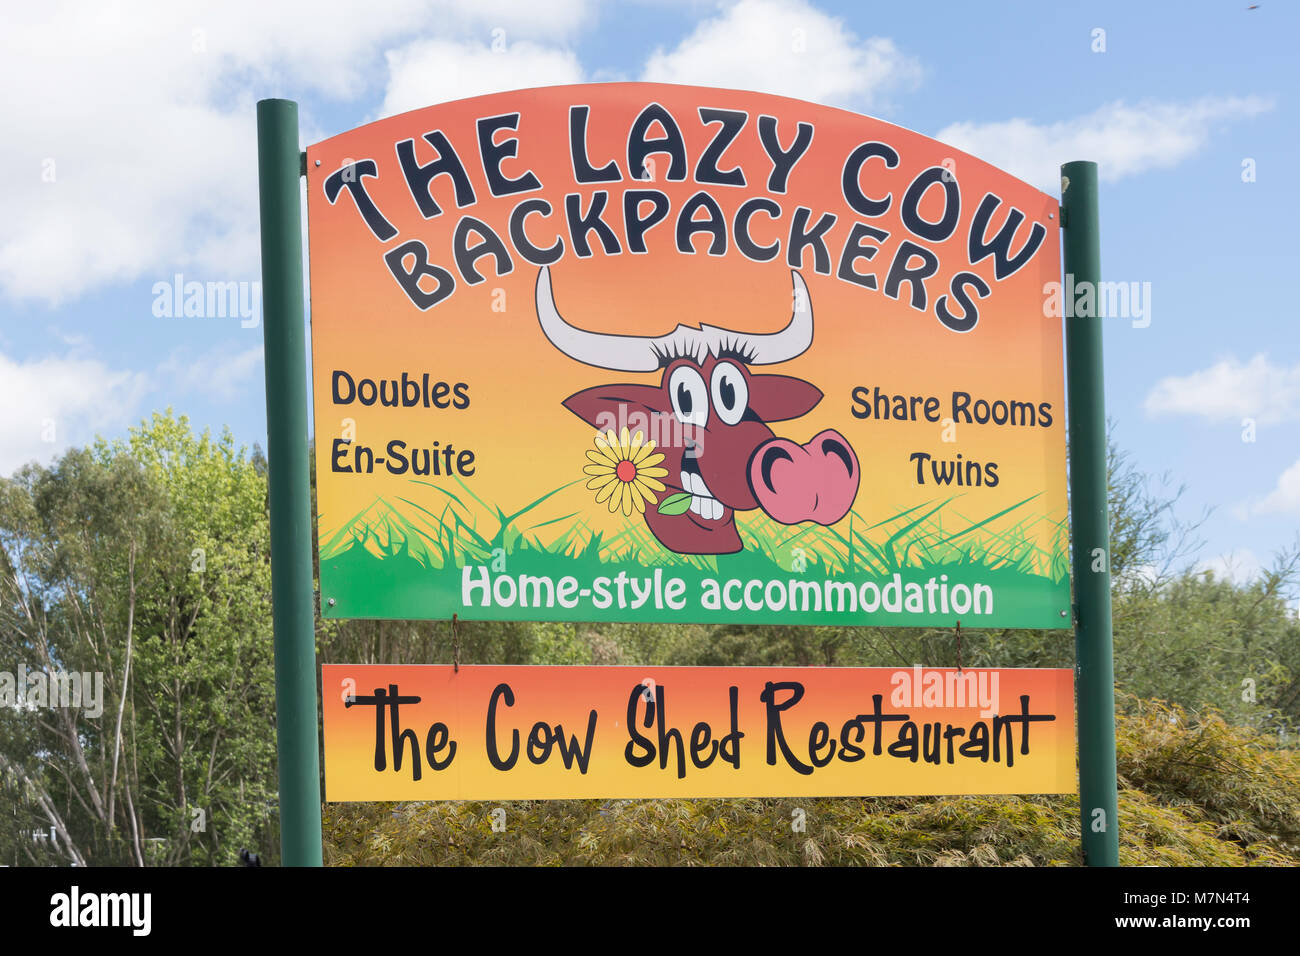 The Lazy Cow Backpackers and Cow Shed Restaurant sign, Waller Street (State Highway 6), Murchison, Tasman Region, New Zealand Stock Photo